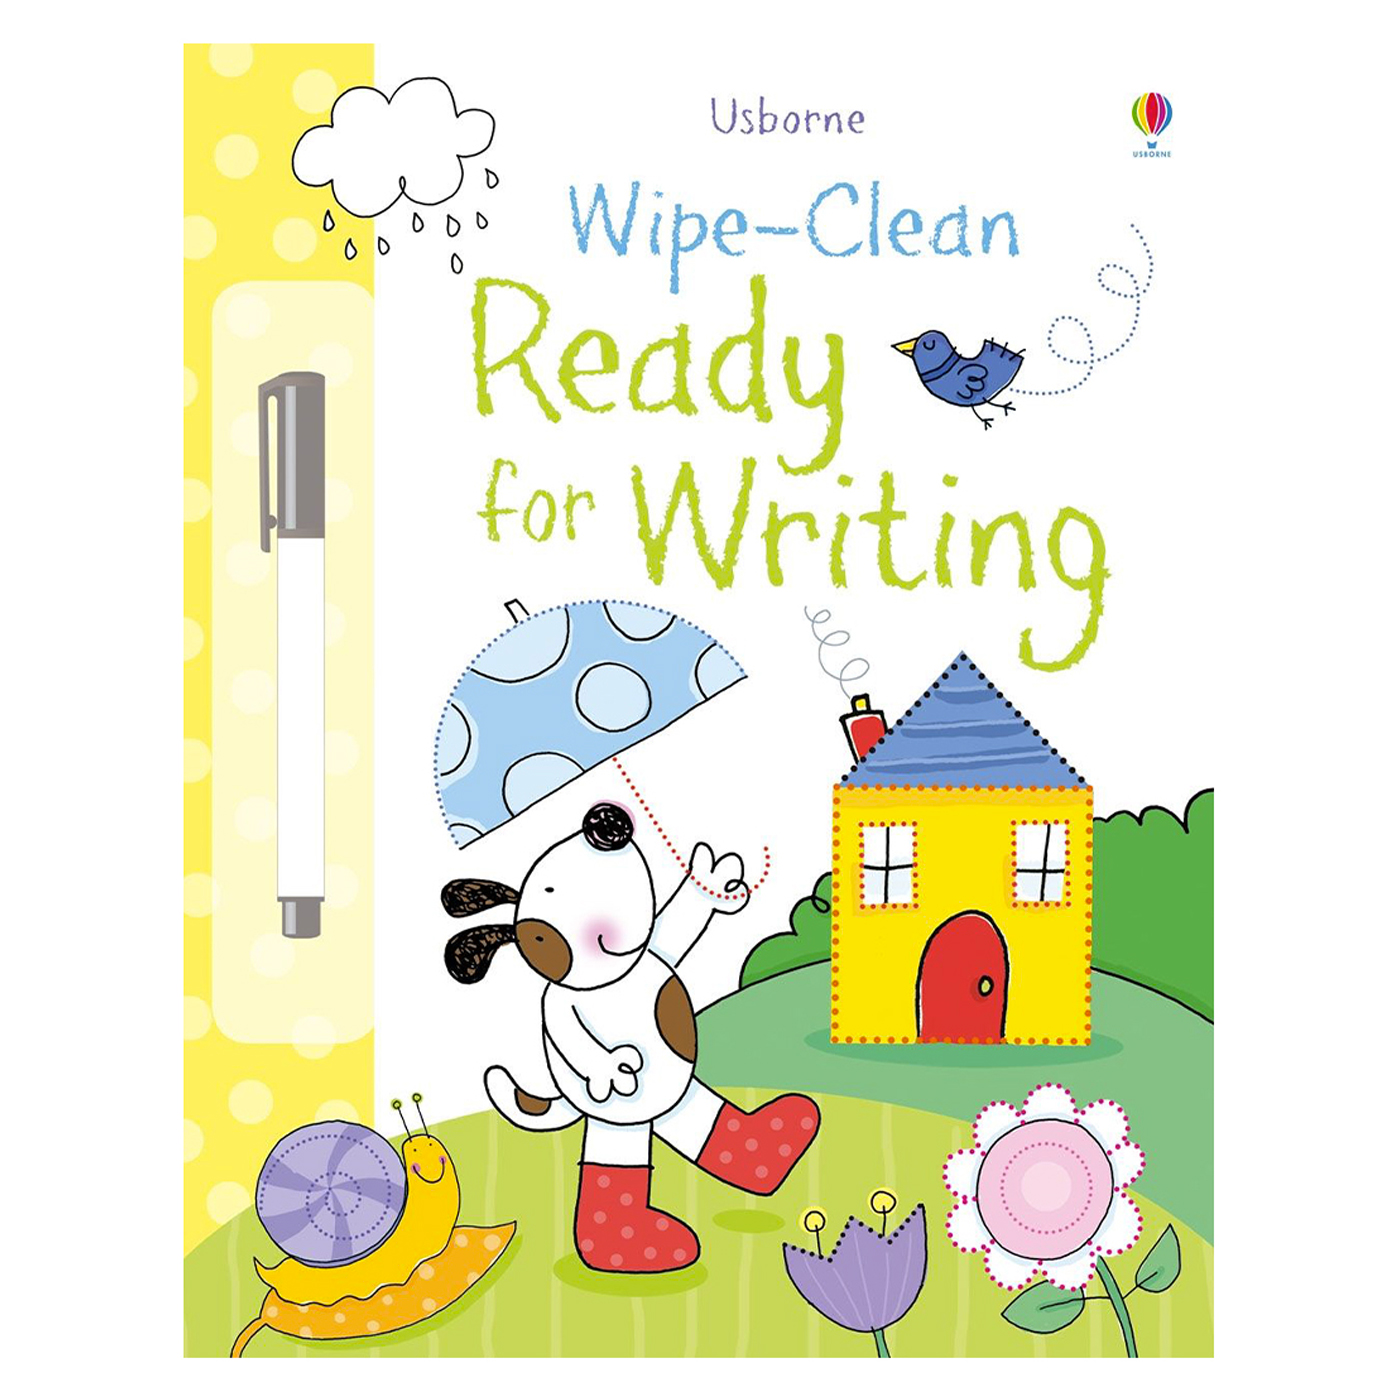  Wipe-Clean Ready for Writing